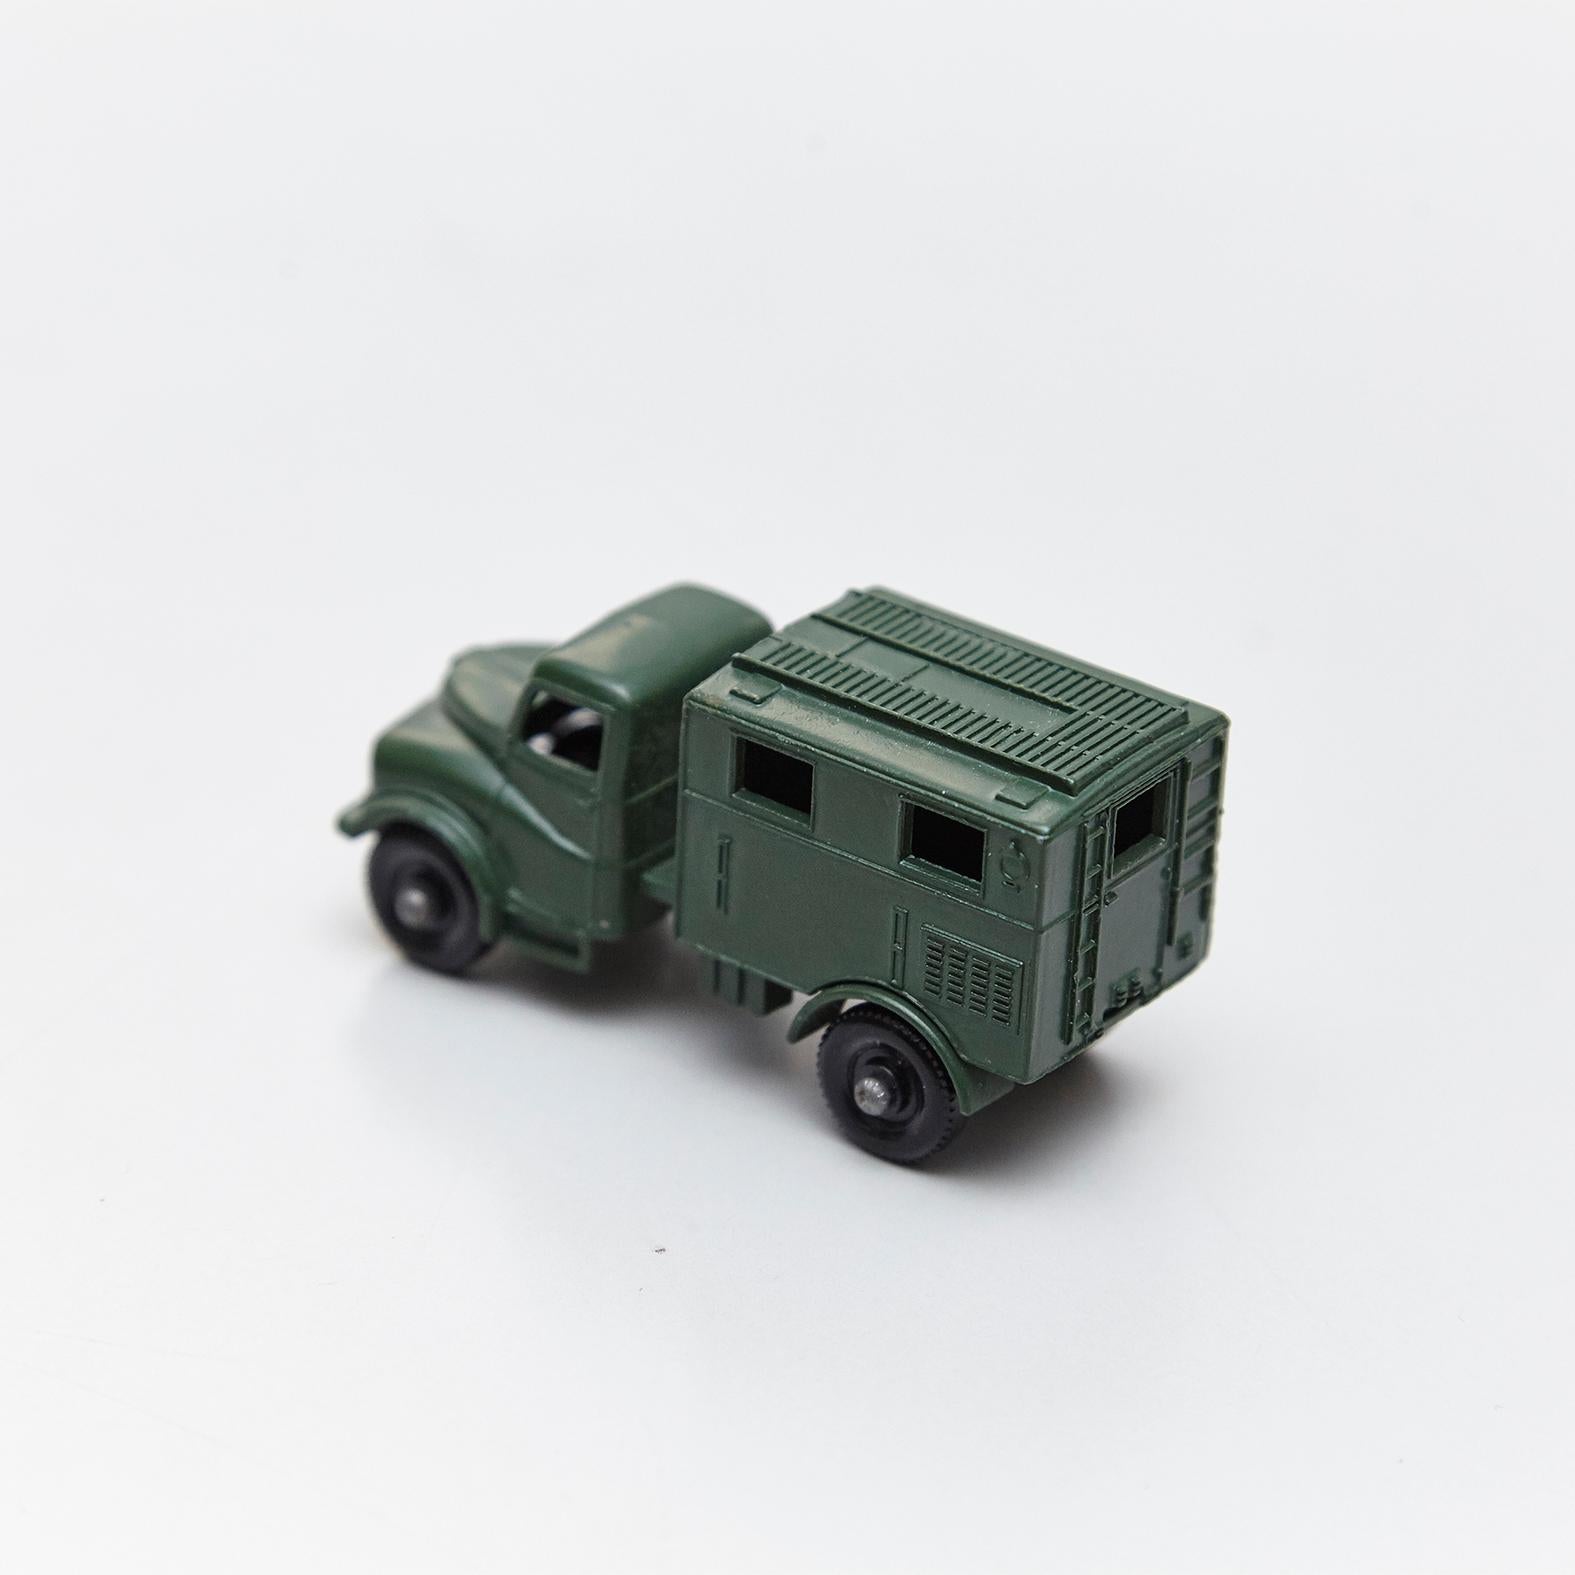 Lesney Matchboxes Series Antique Metal Toy Cars Green Military, Free Shipping 2